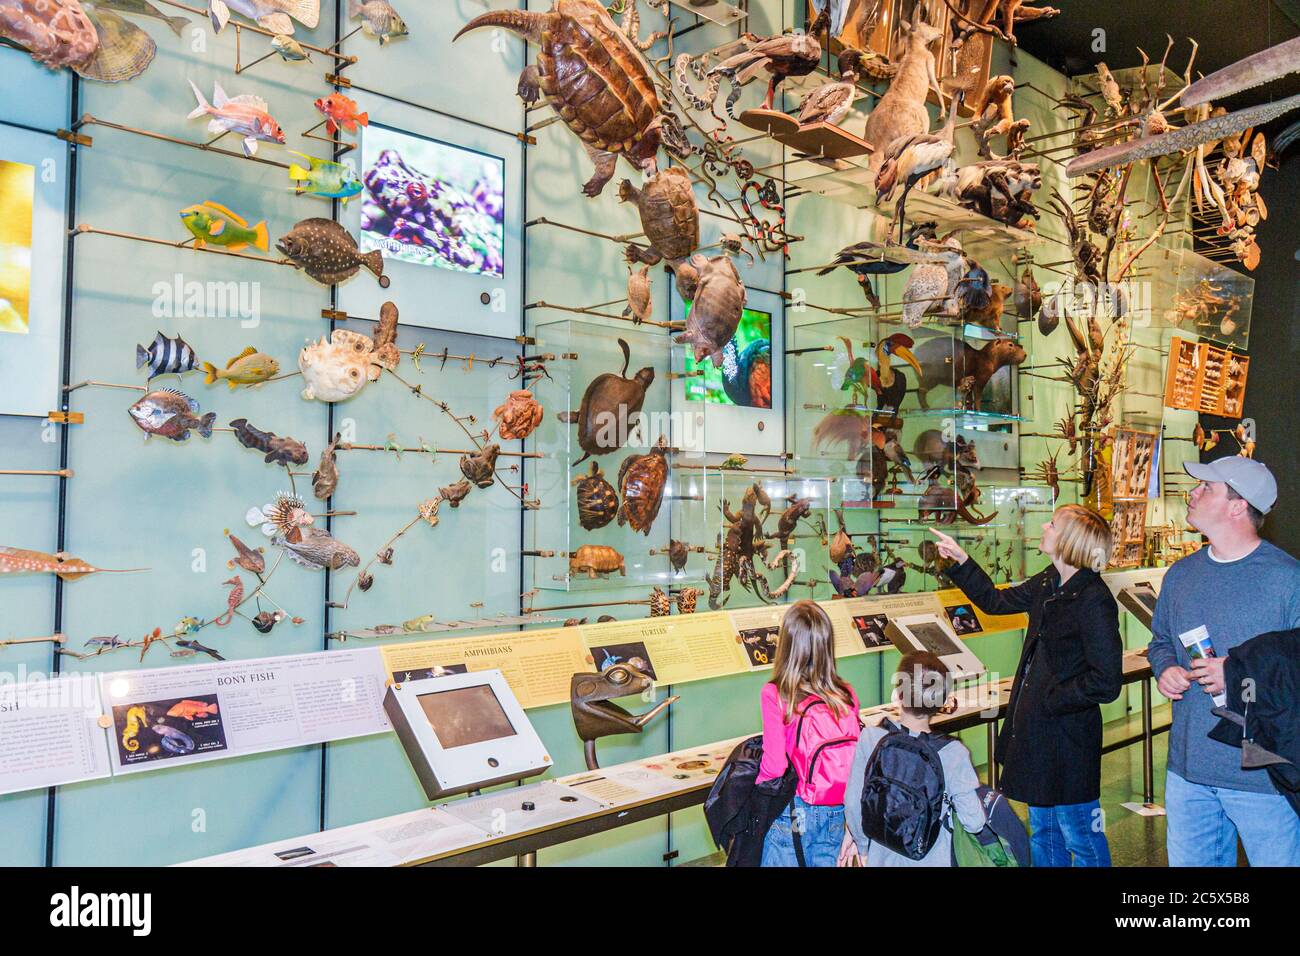 New York,New York City,NYC,Manhattan,Uptown,Central Park West,American Museum of Natural History,mostra interattiva,scienza,educazione,biod Foto Stock